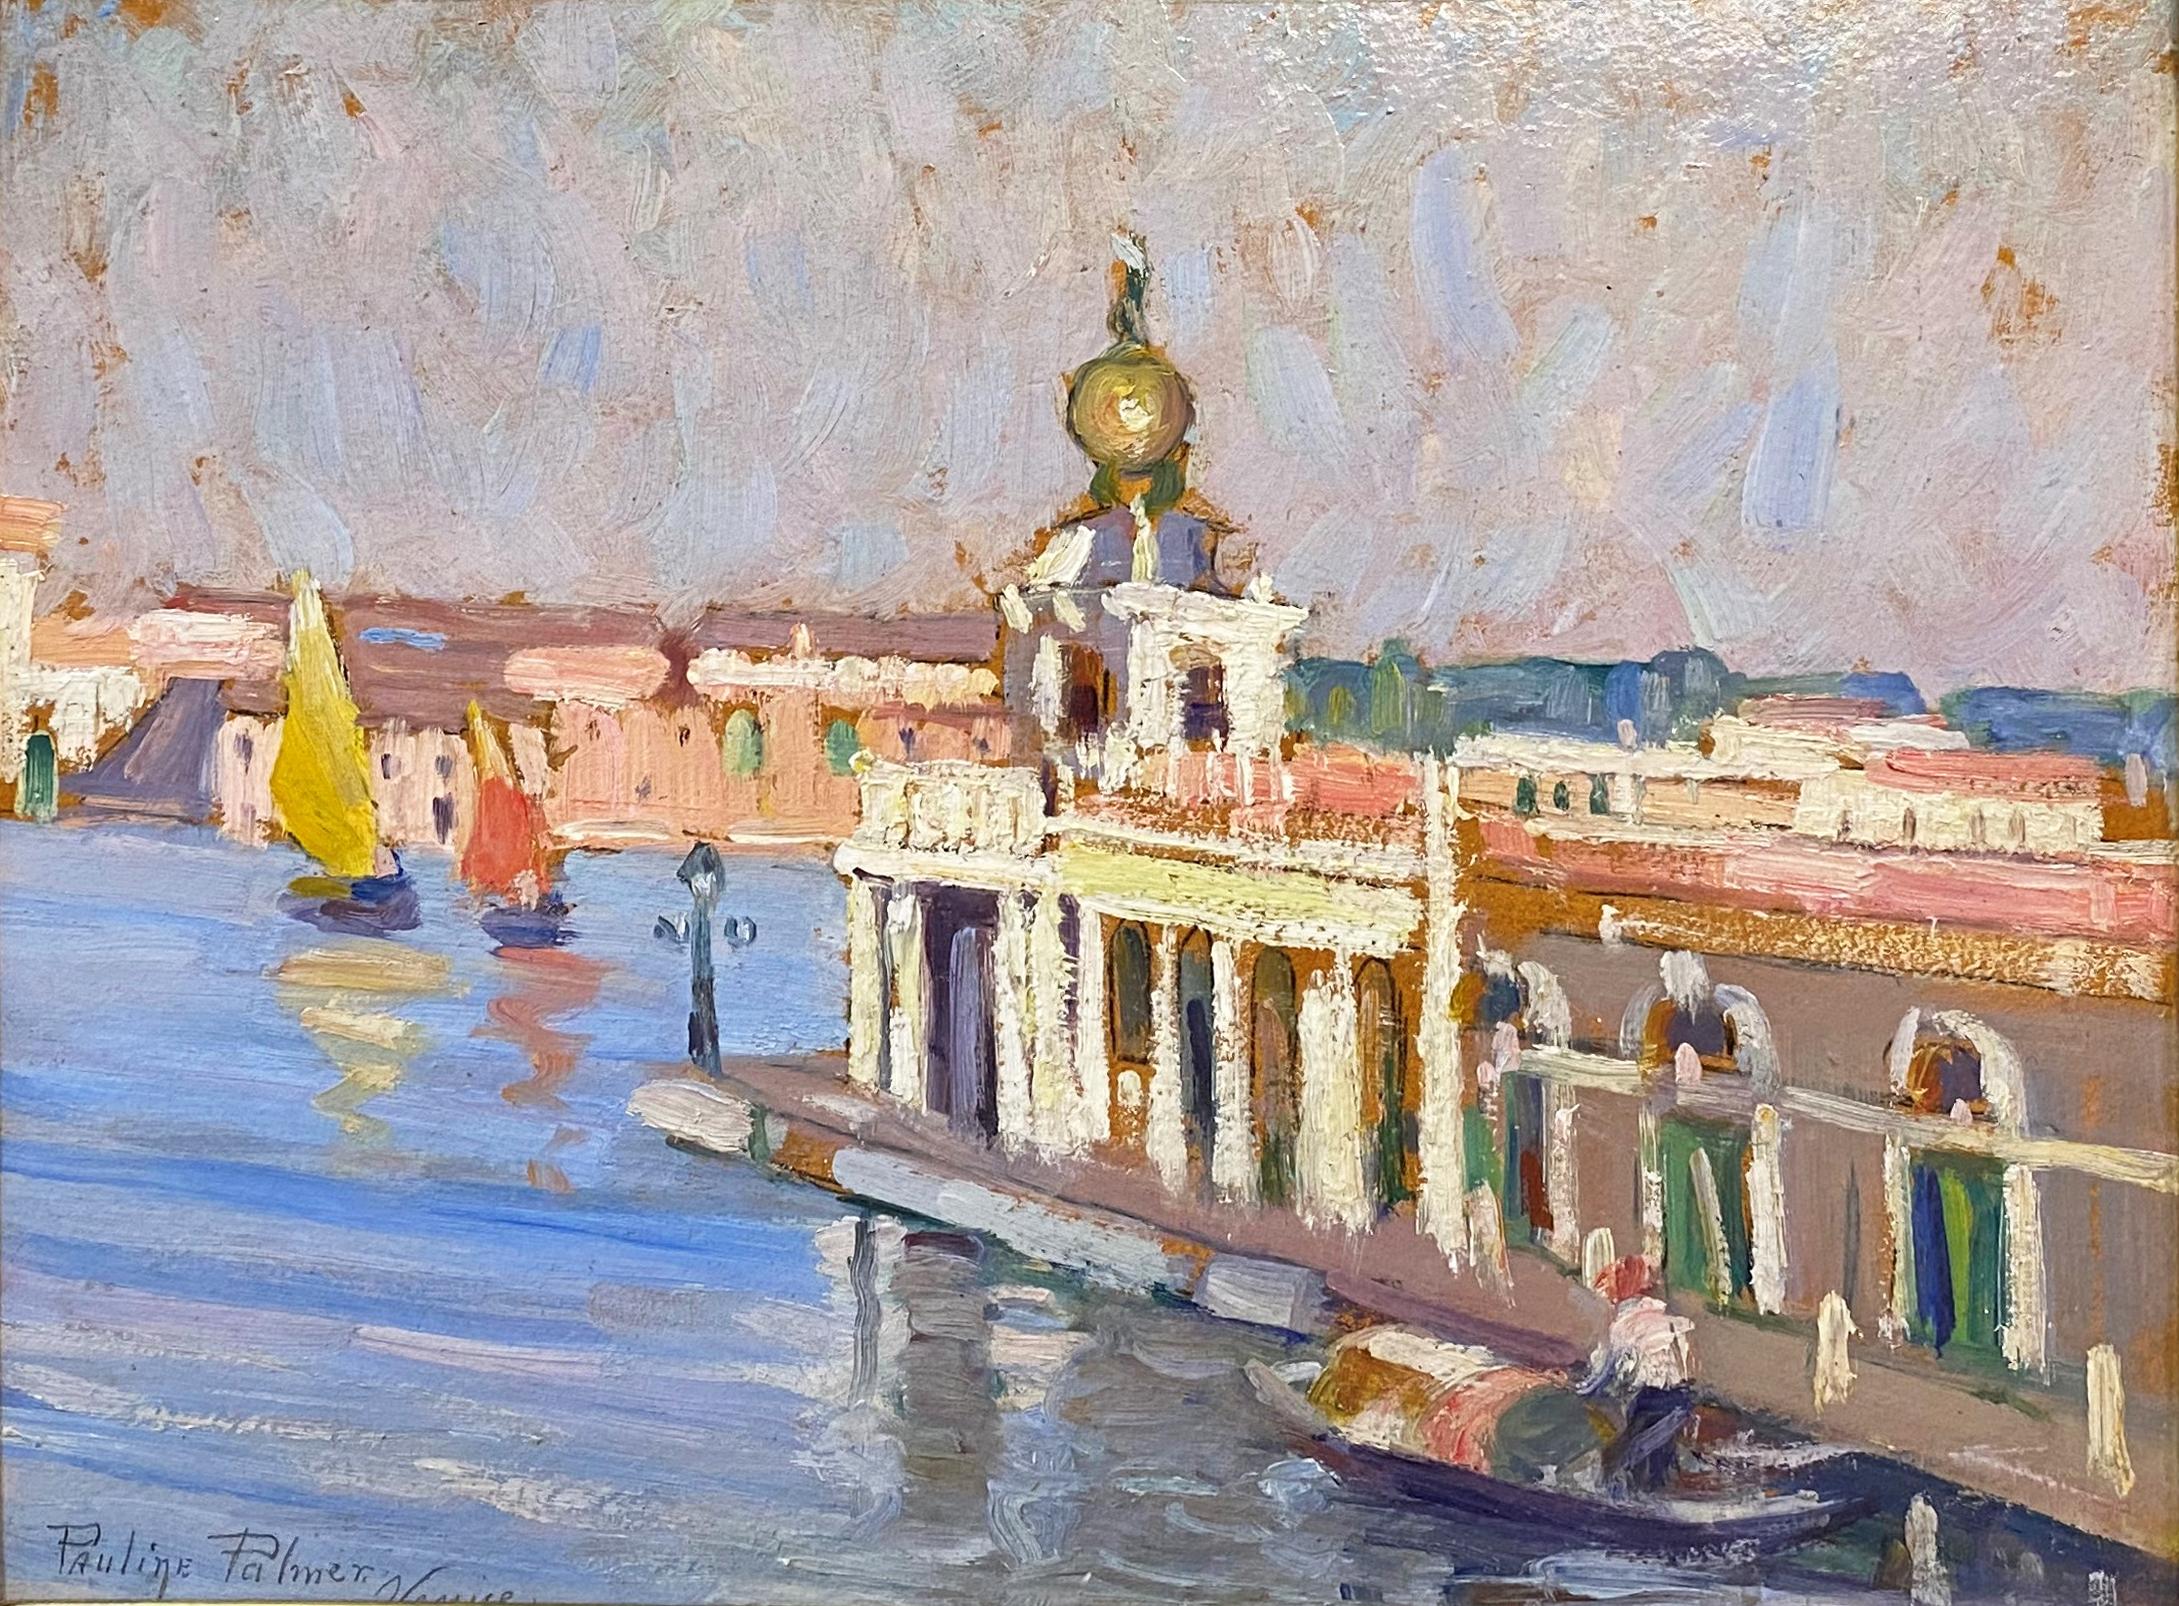 A Scene of Venice - Painting by Pauline Palmer